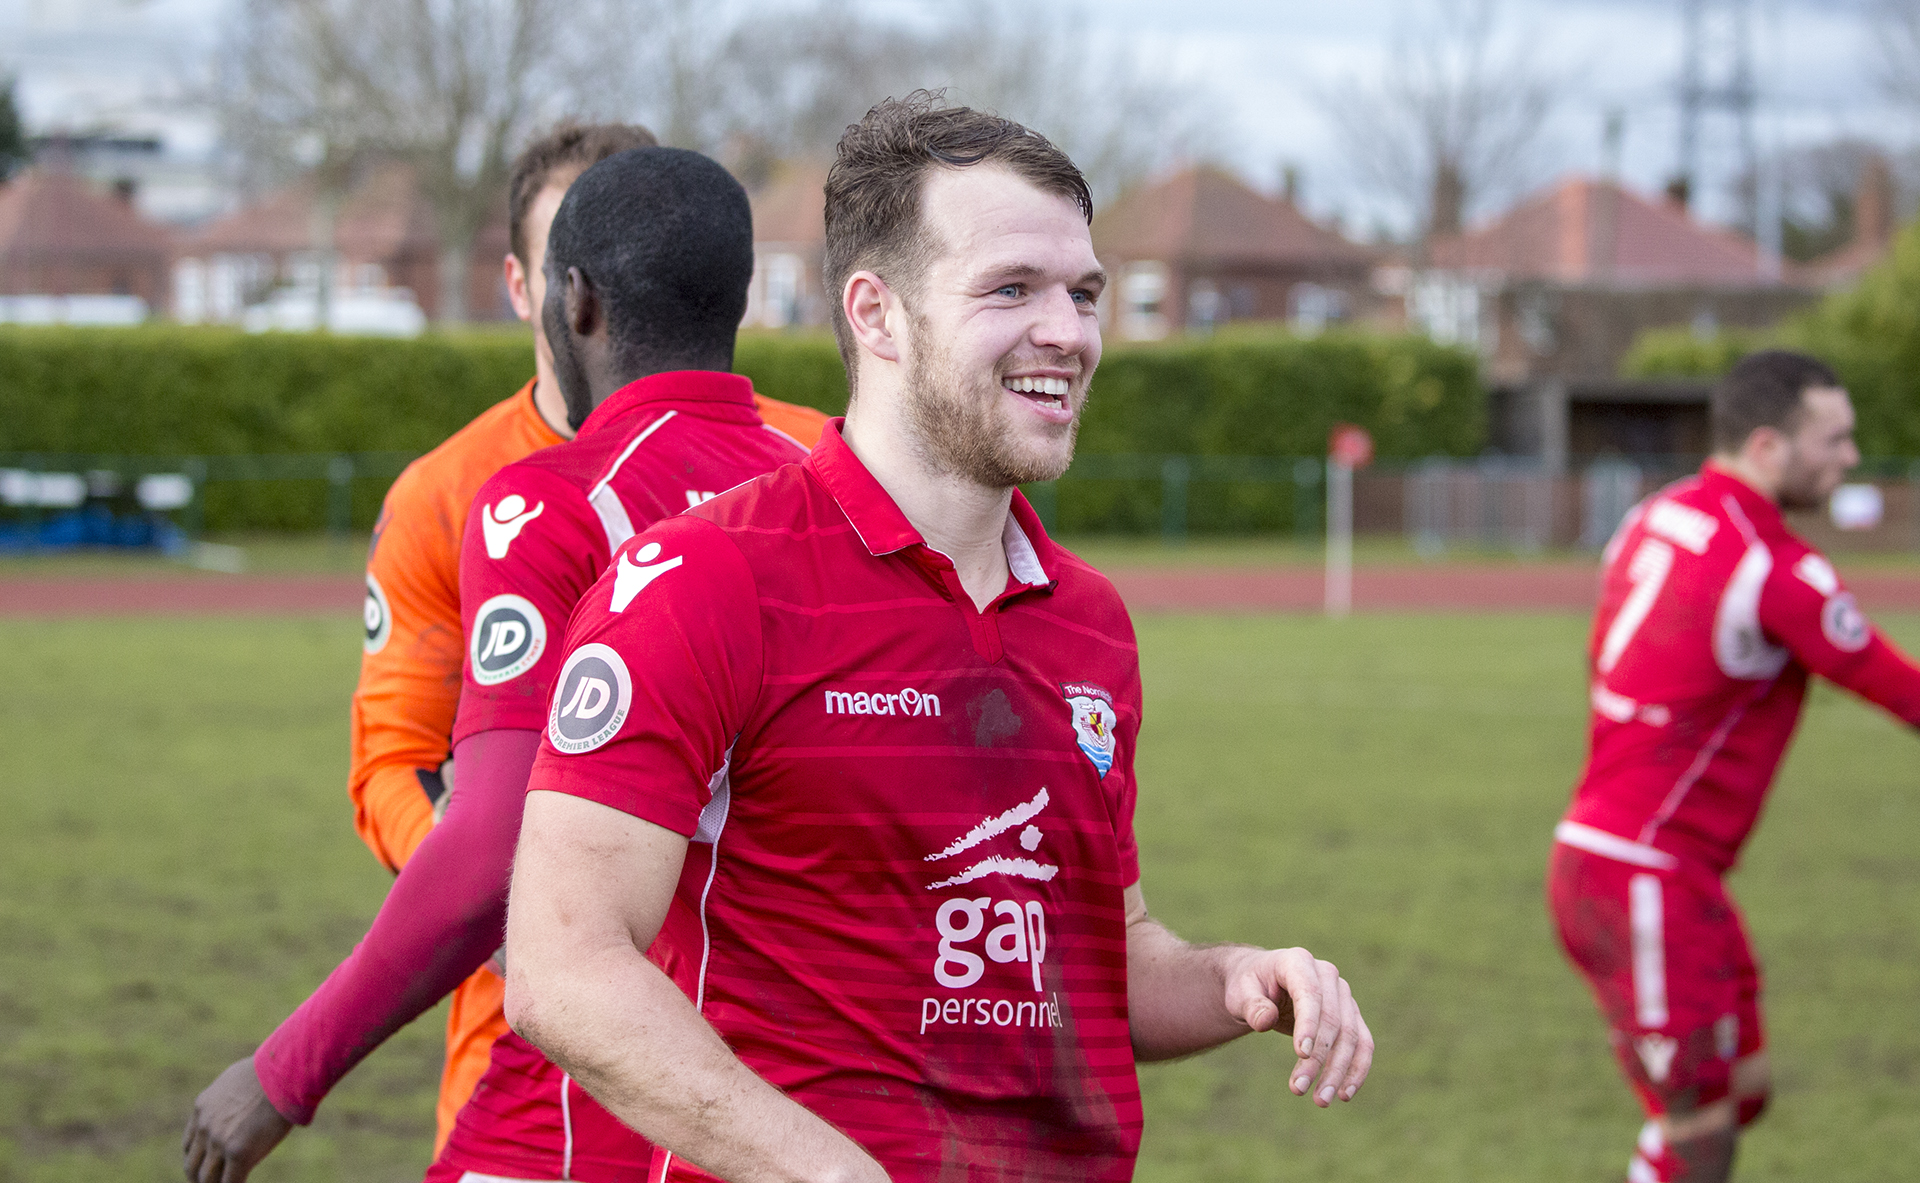 Callum Morris pictured after The Nomads' 2-1 victory over Cefn Druids - © NCM Media